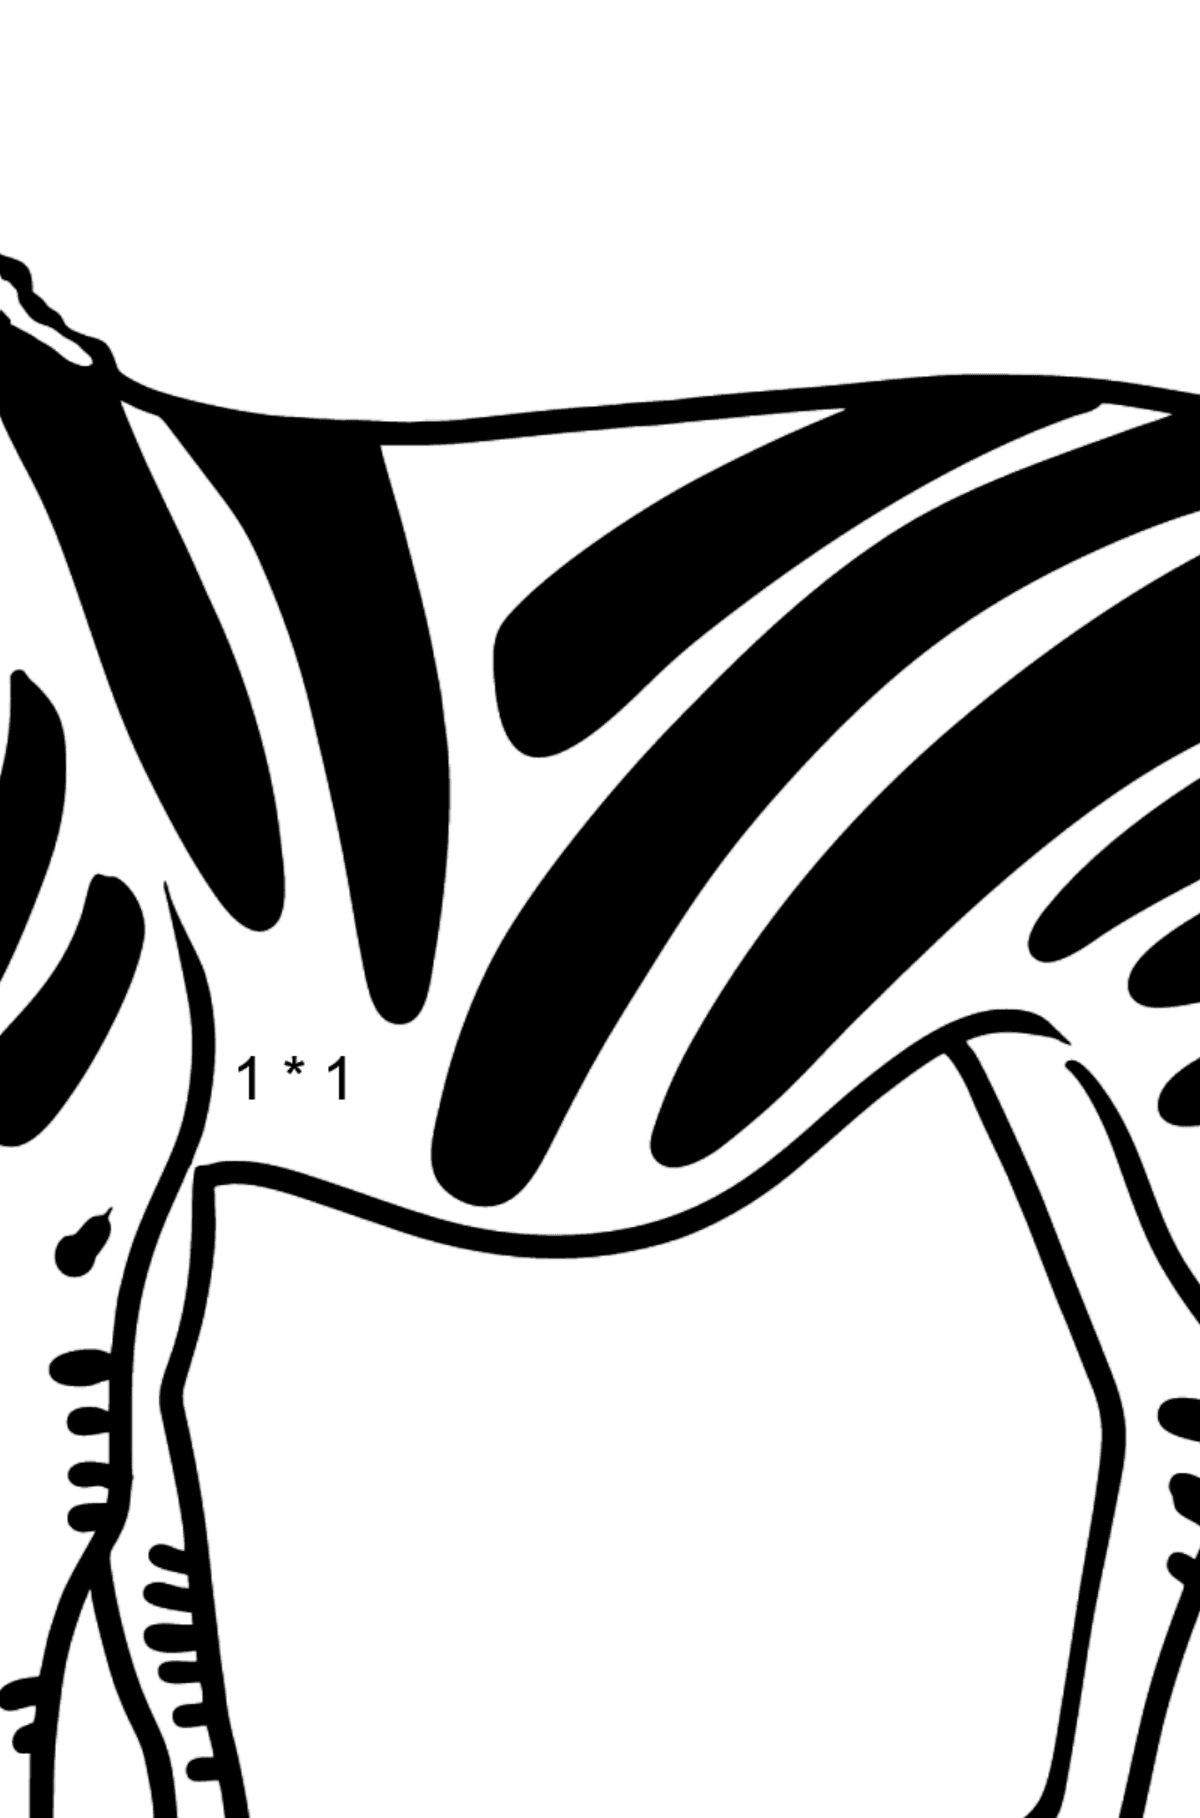 Zebra coloring page - Math Coloring - Multiplication for Kids